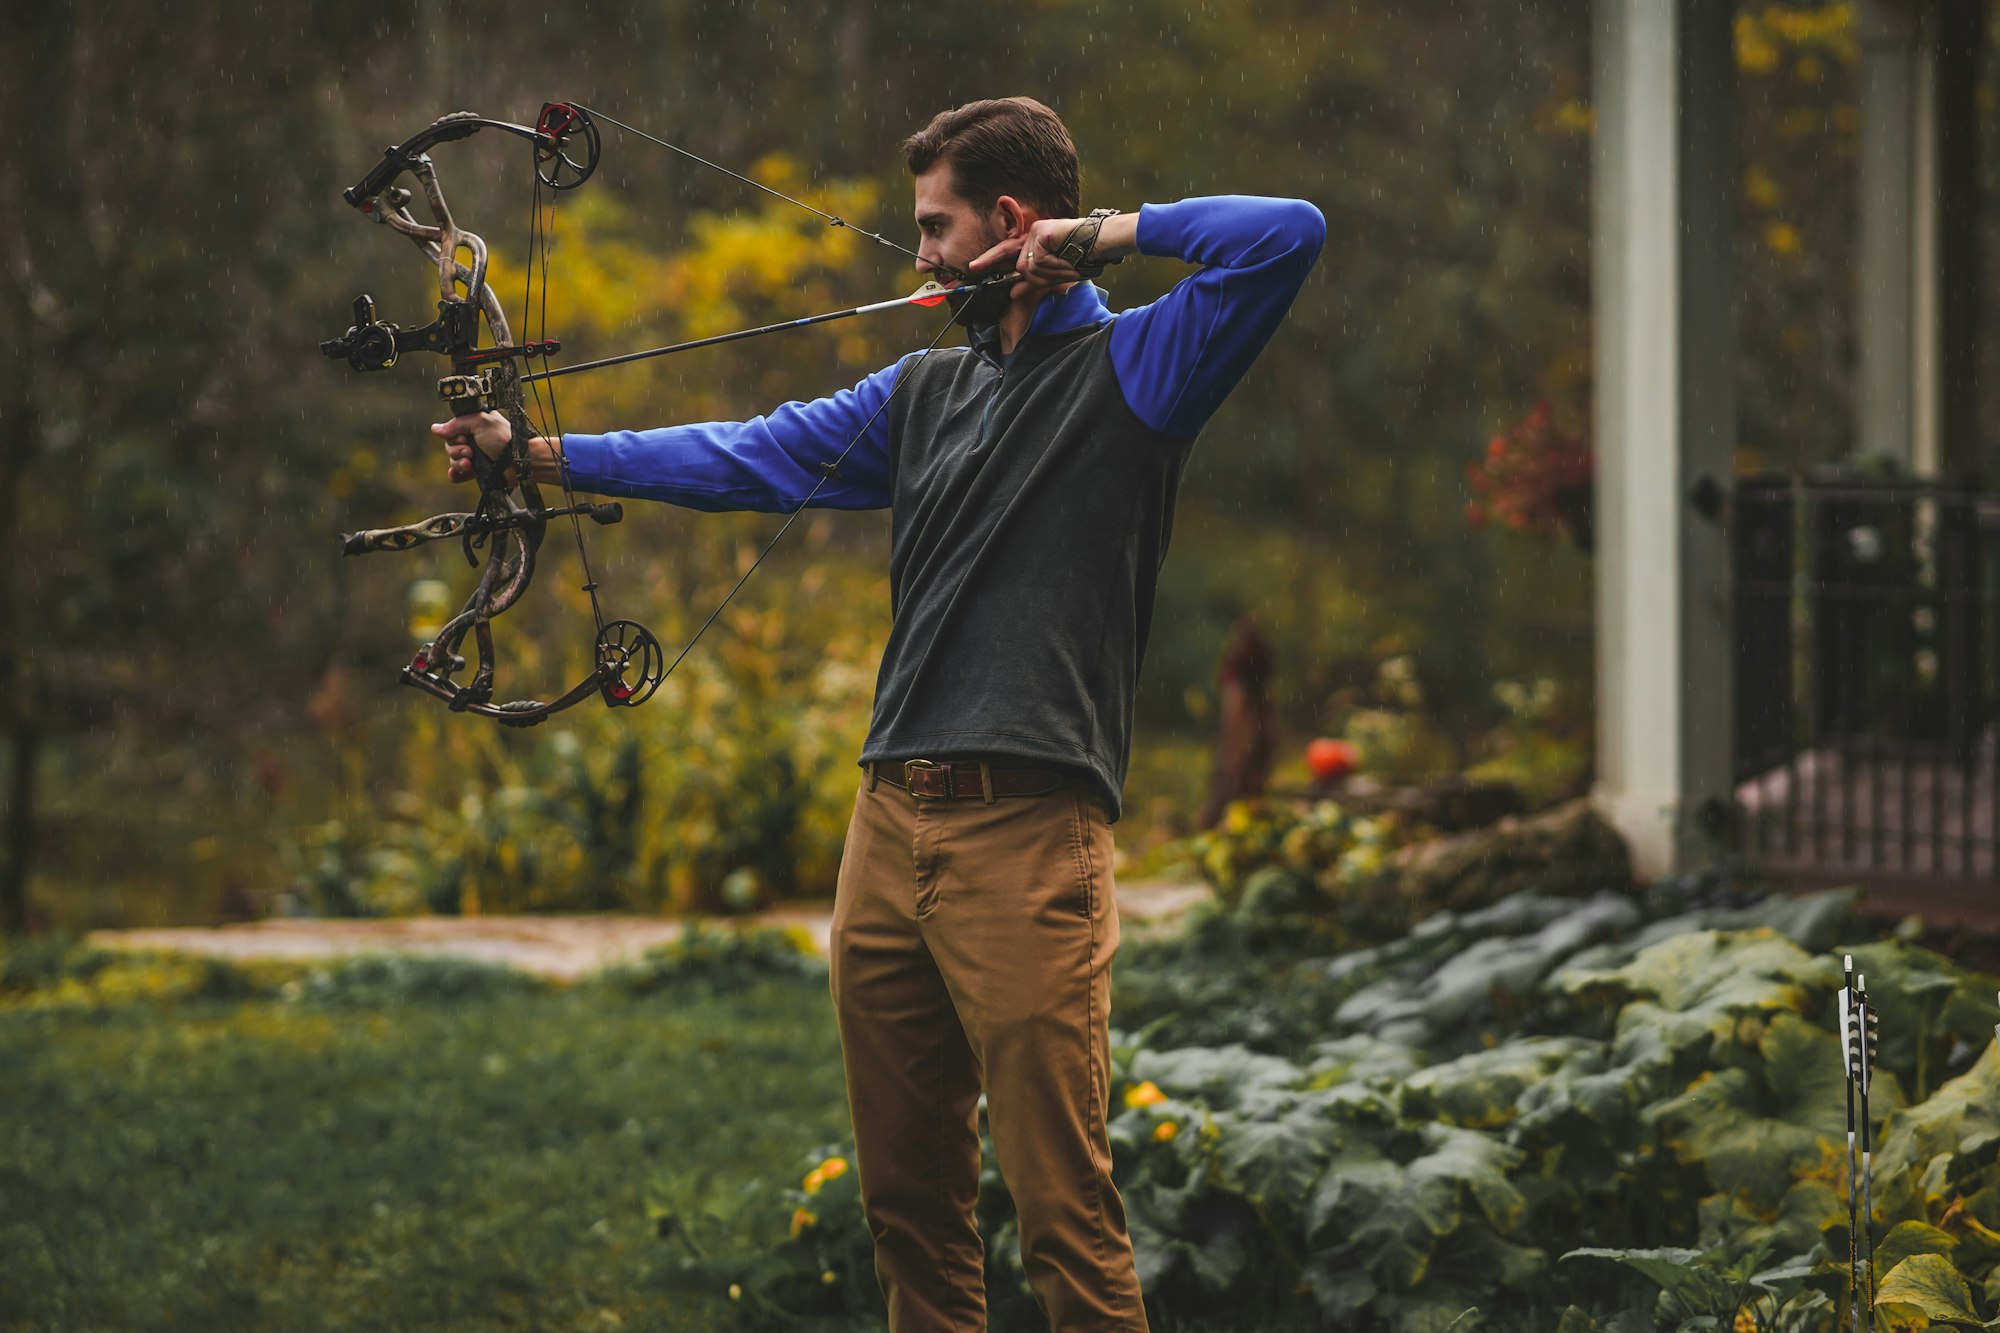 Top 5 Best Compound Bow of 2022 - New Bows for 2022 Reviewed